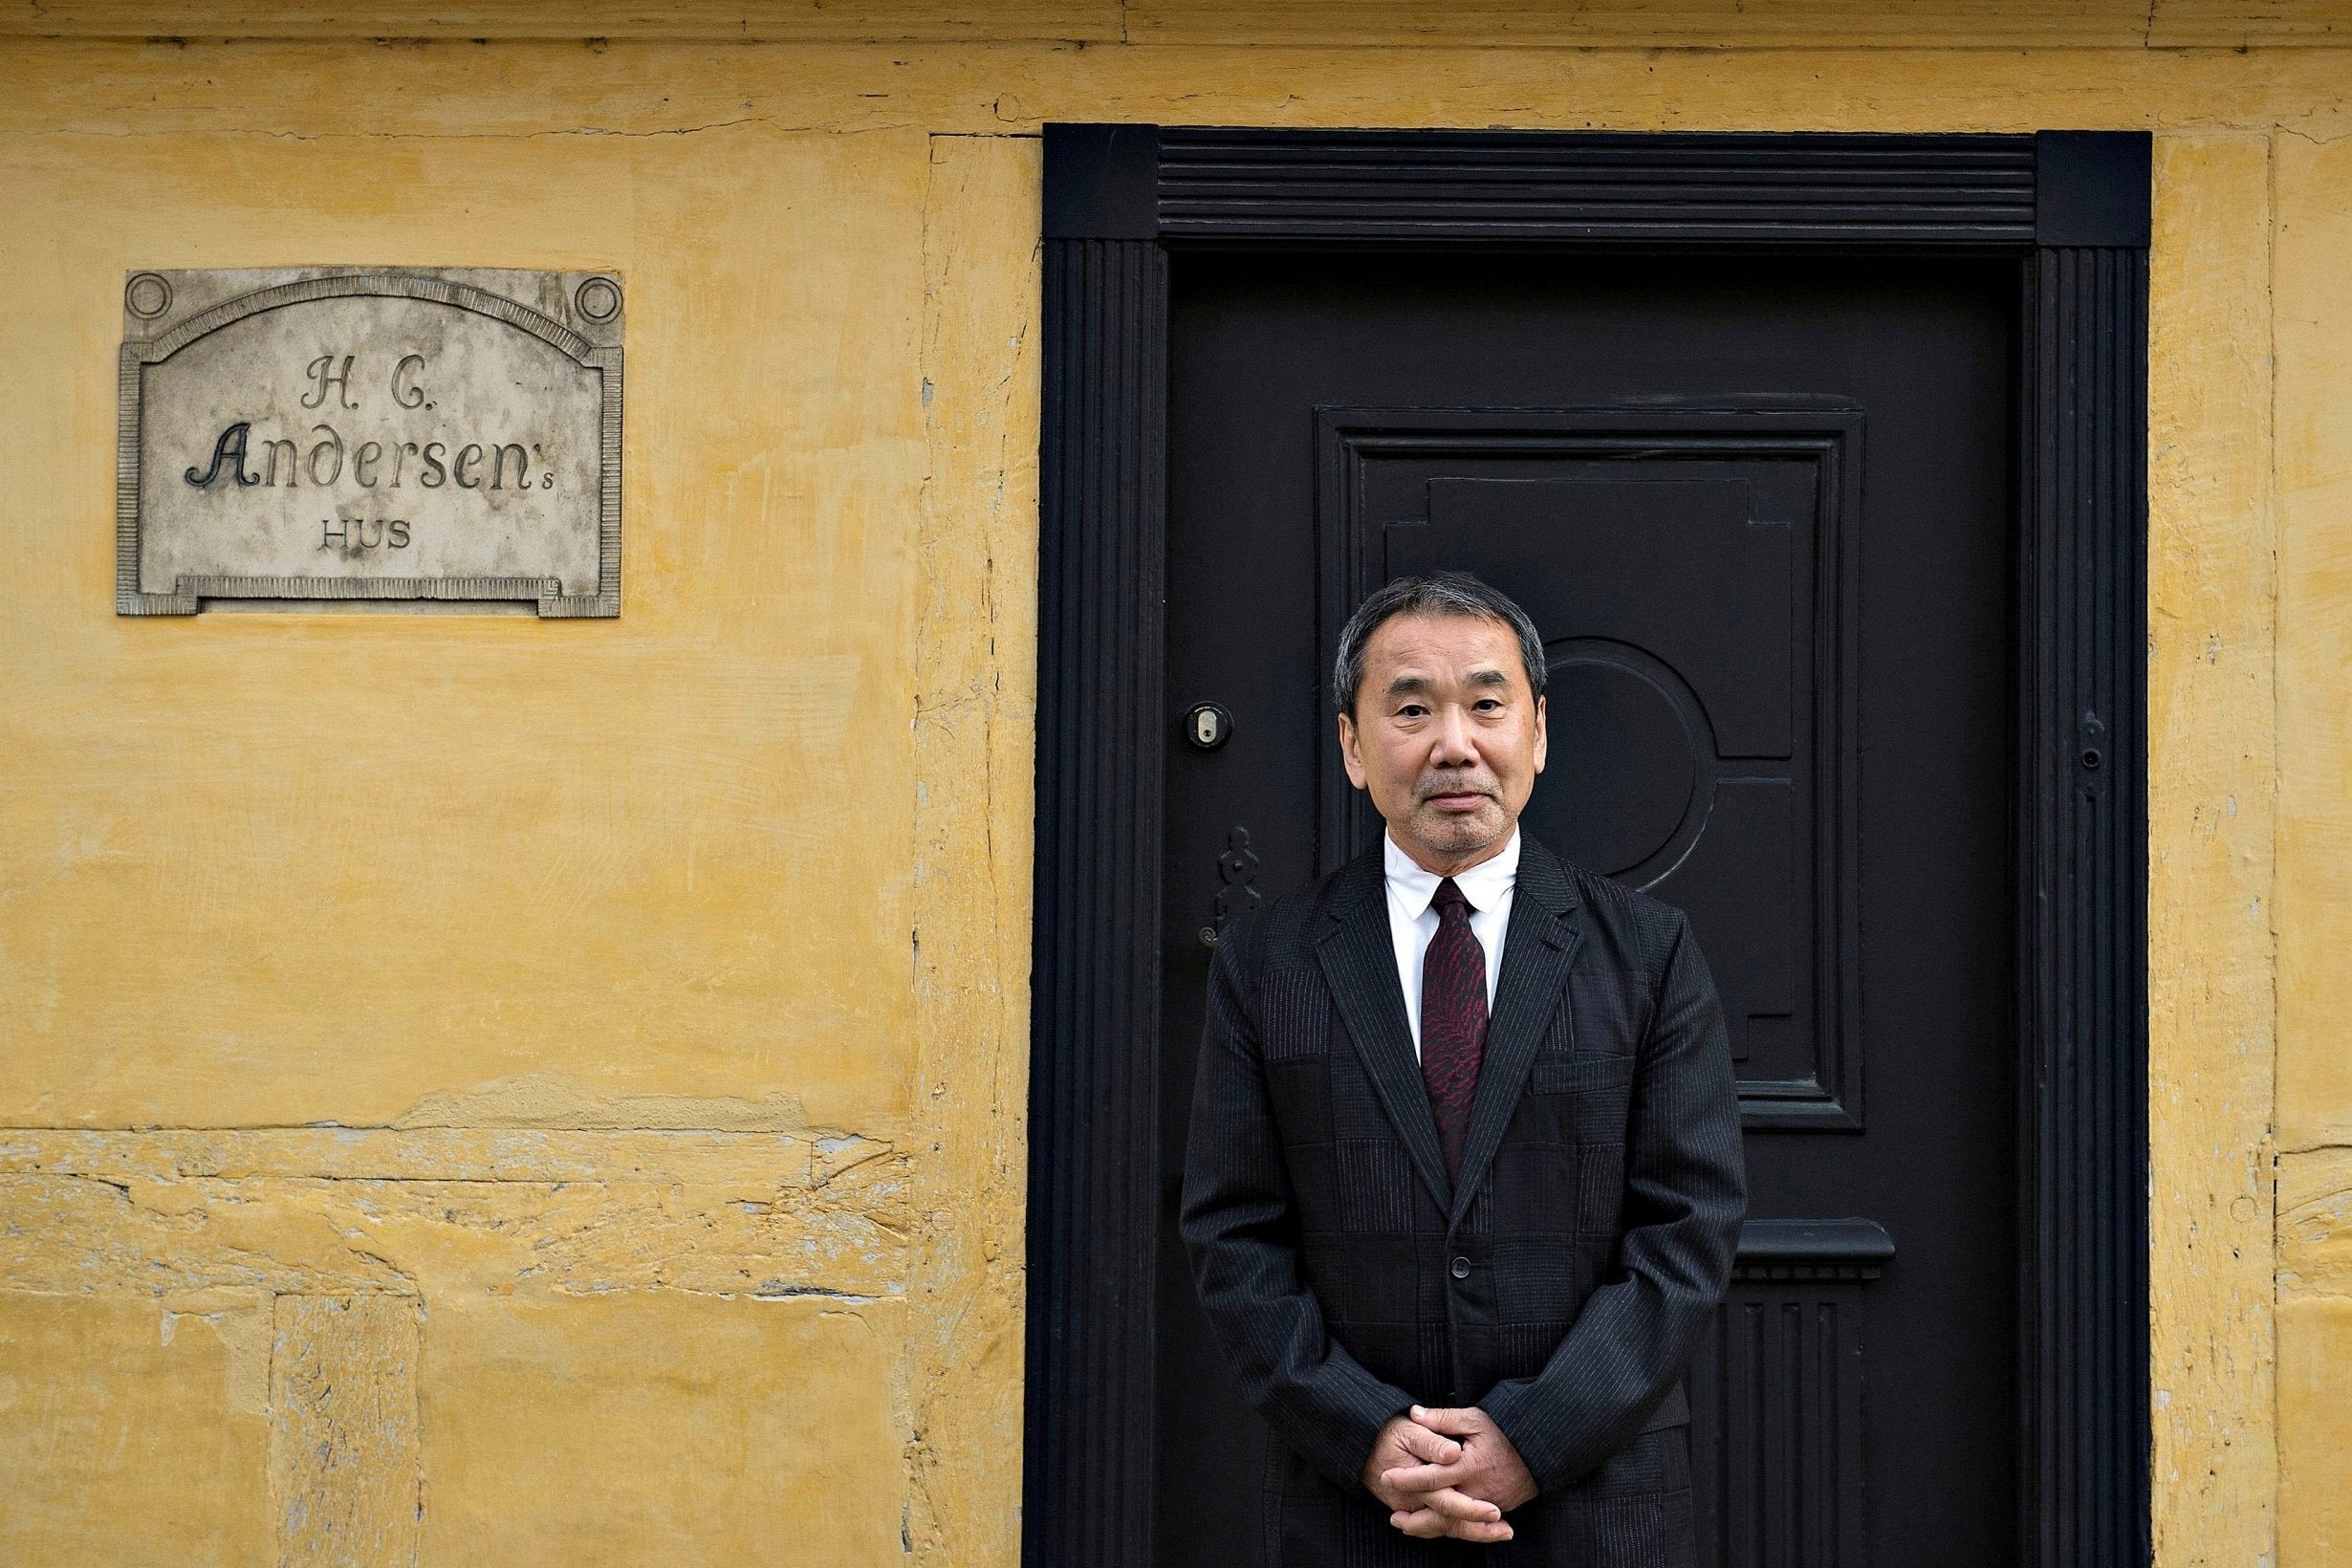 Now in his sixties, Murakami has begun to consider middle age more carefully